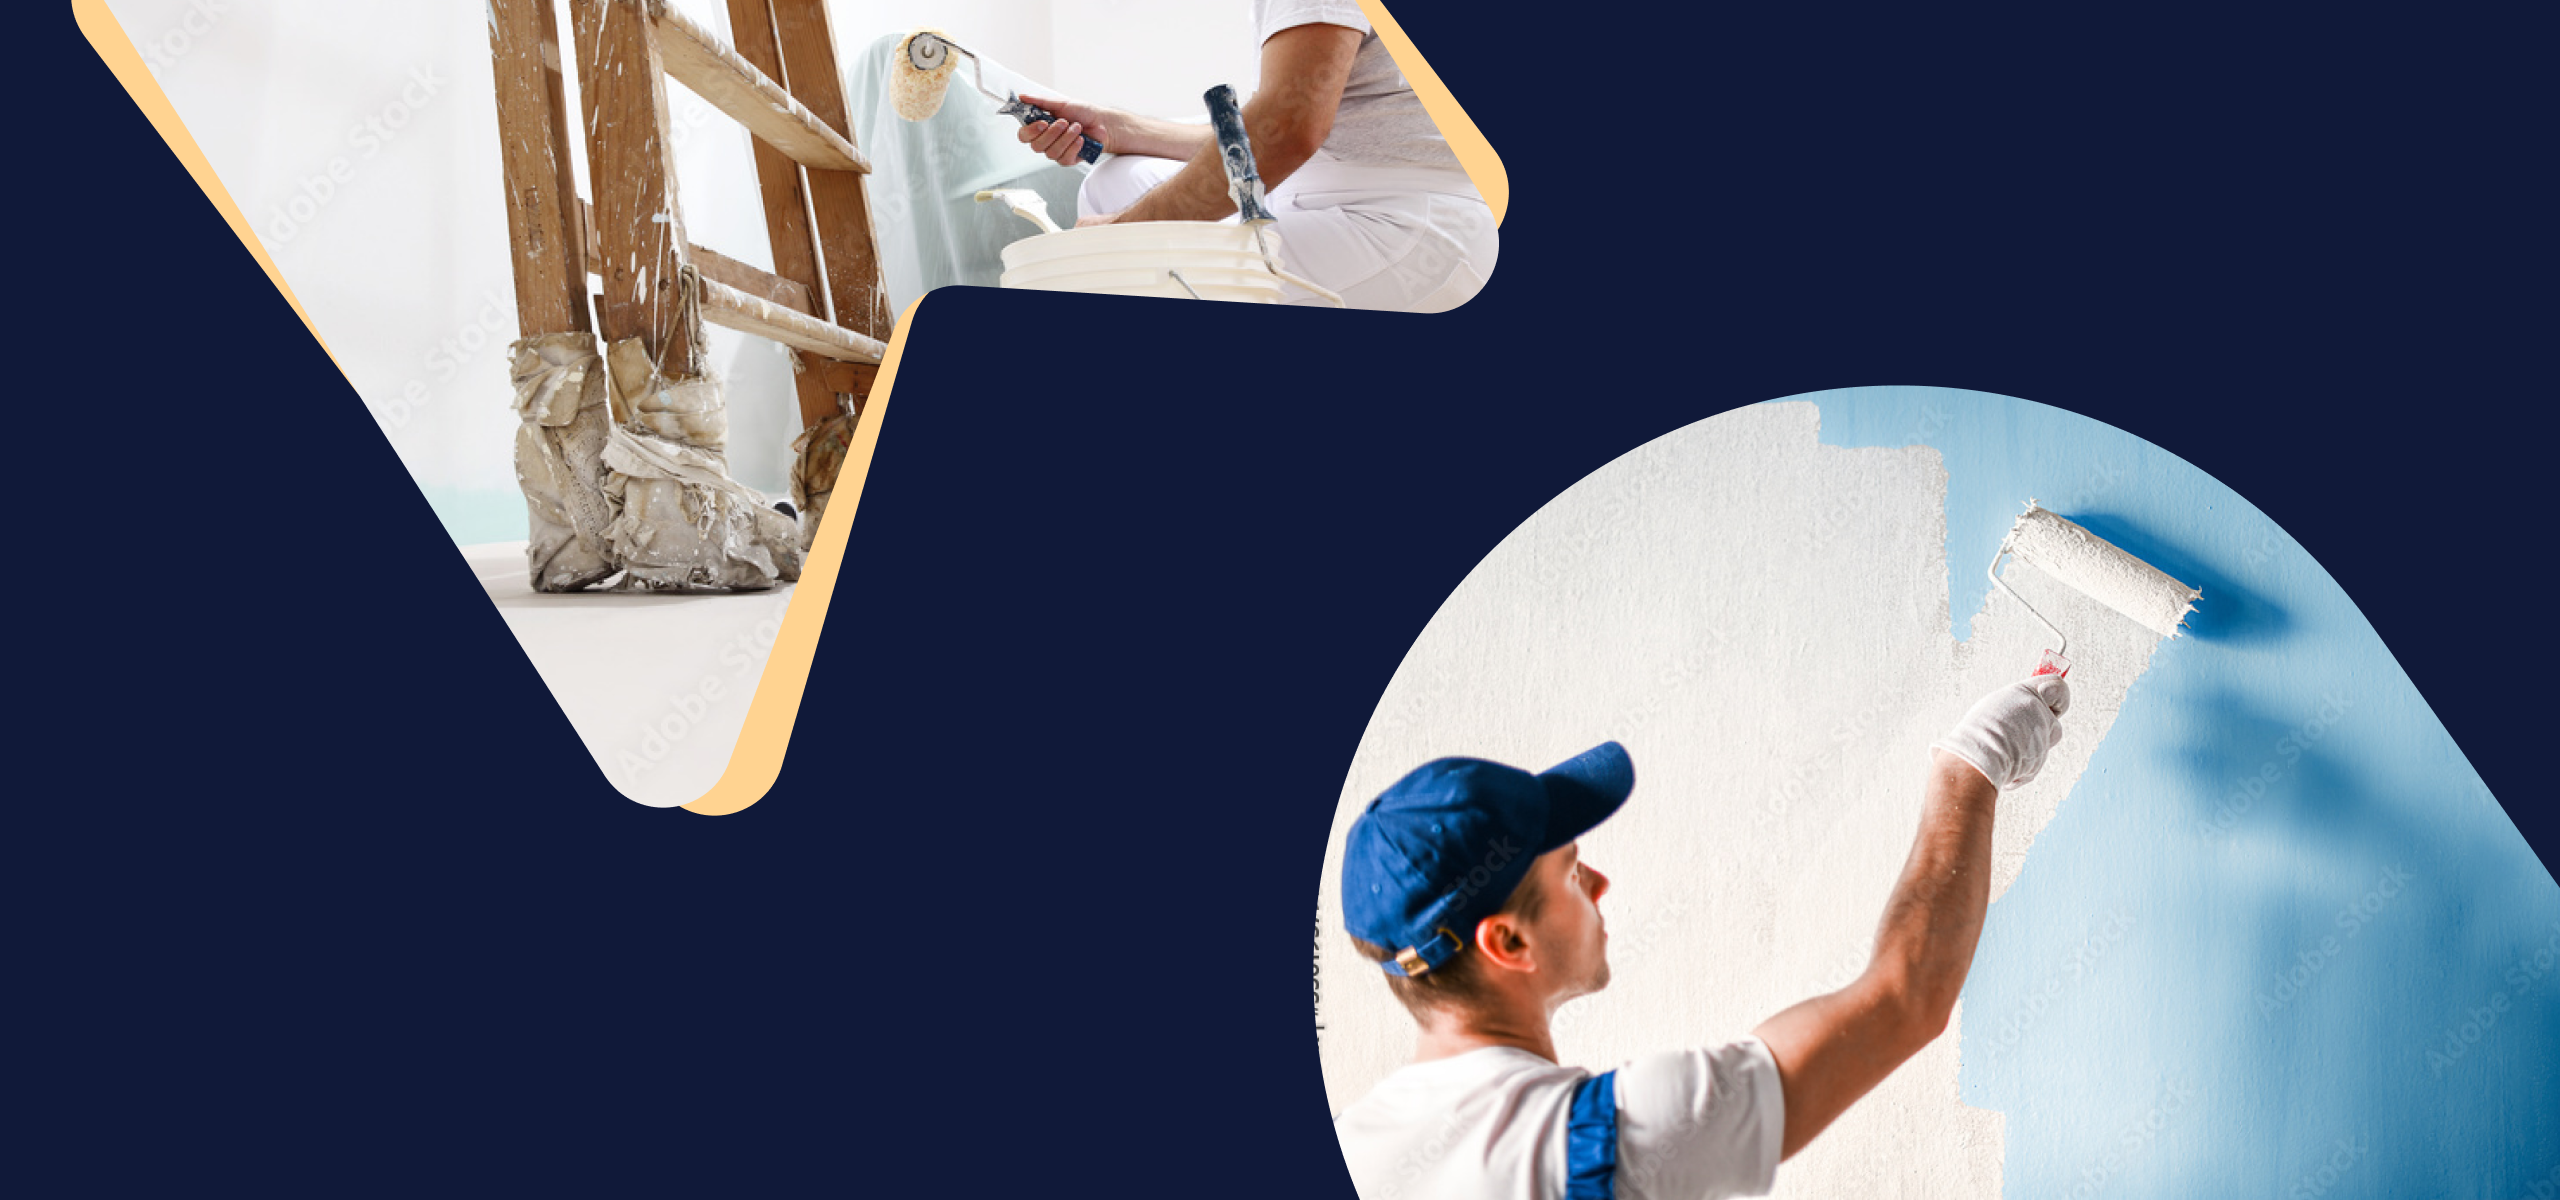 Finding a Painter for Your Rental Property